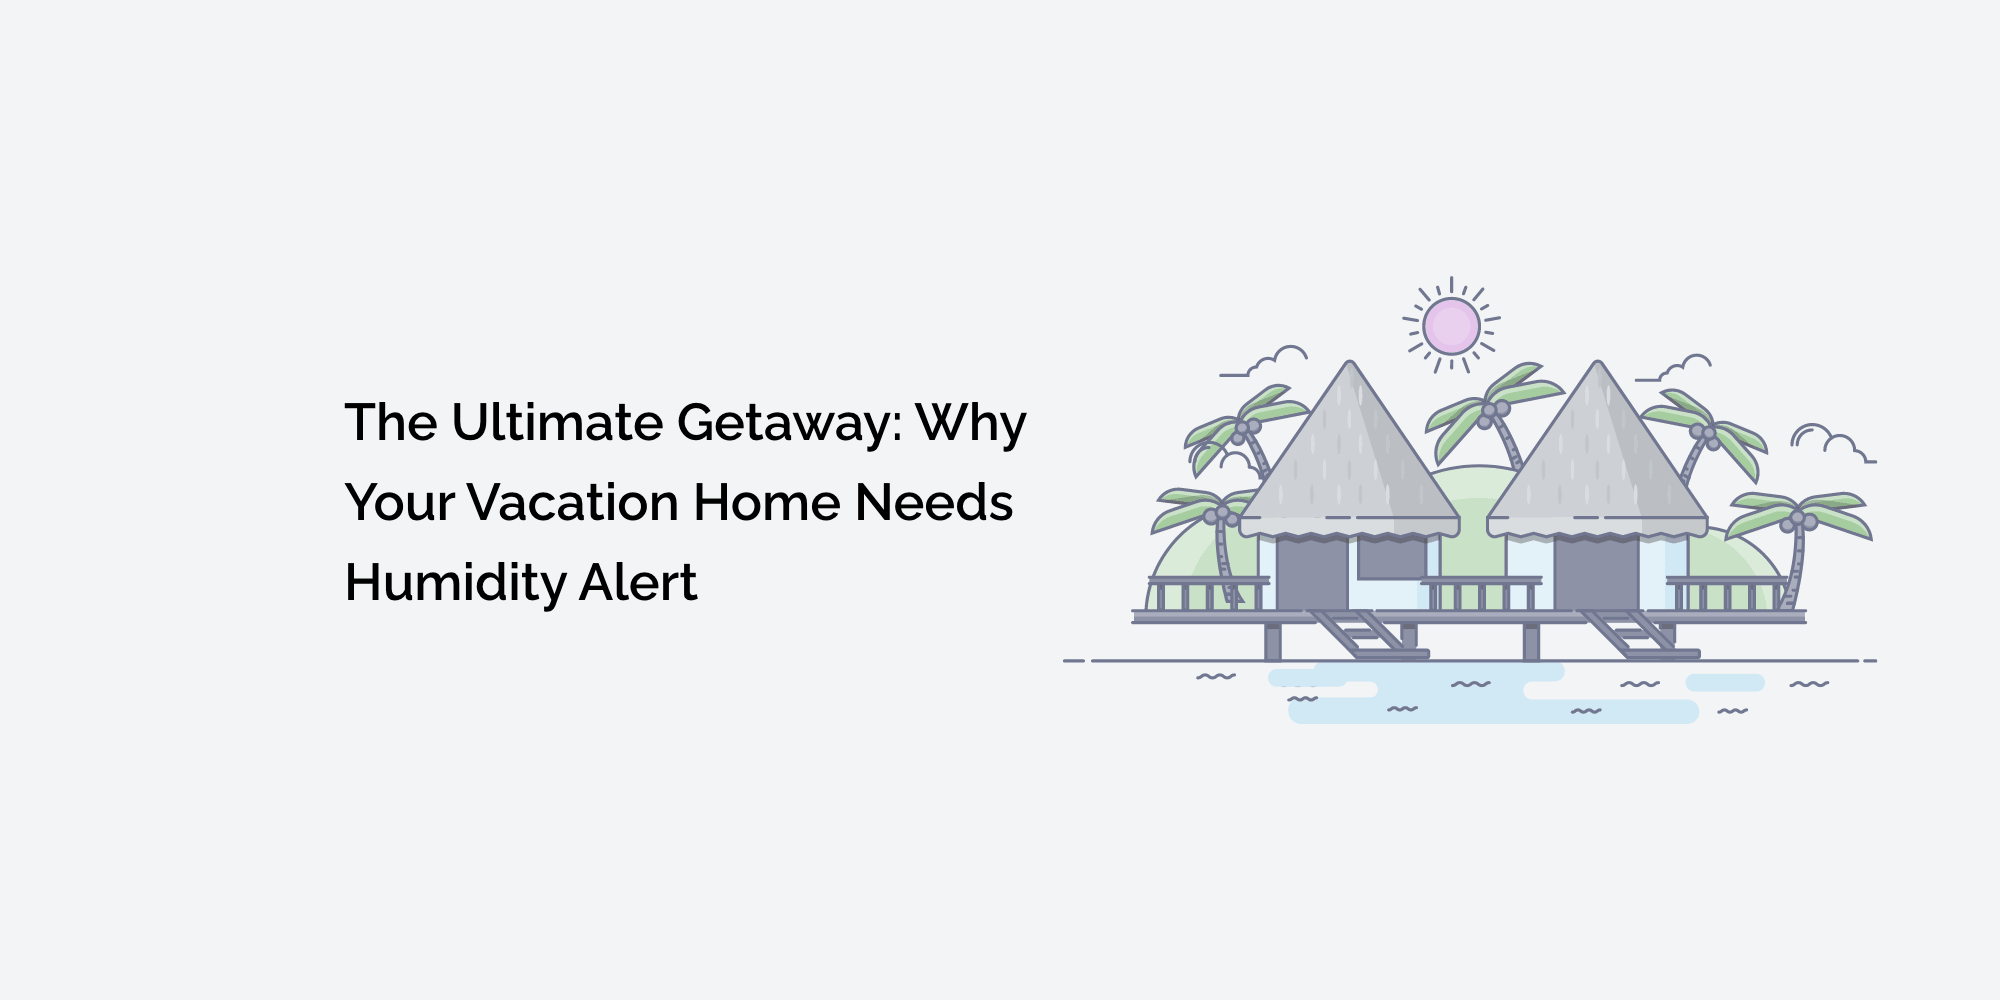 The Ultimate Getaway: Why Your Vacation Home Needs Humidity Alerts